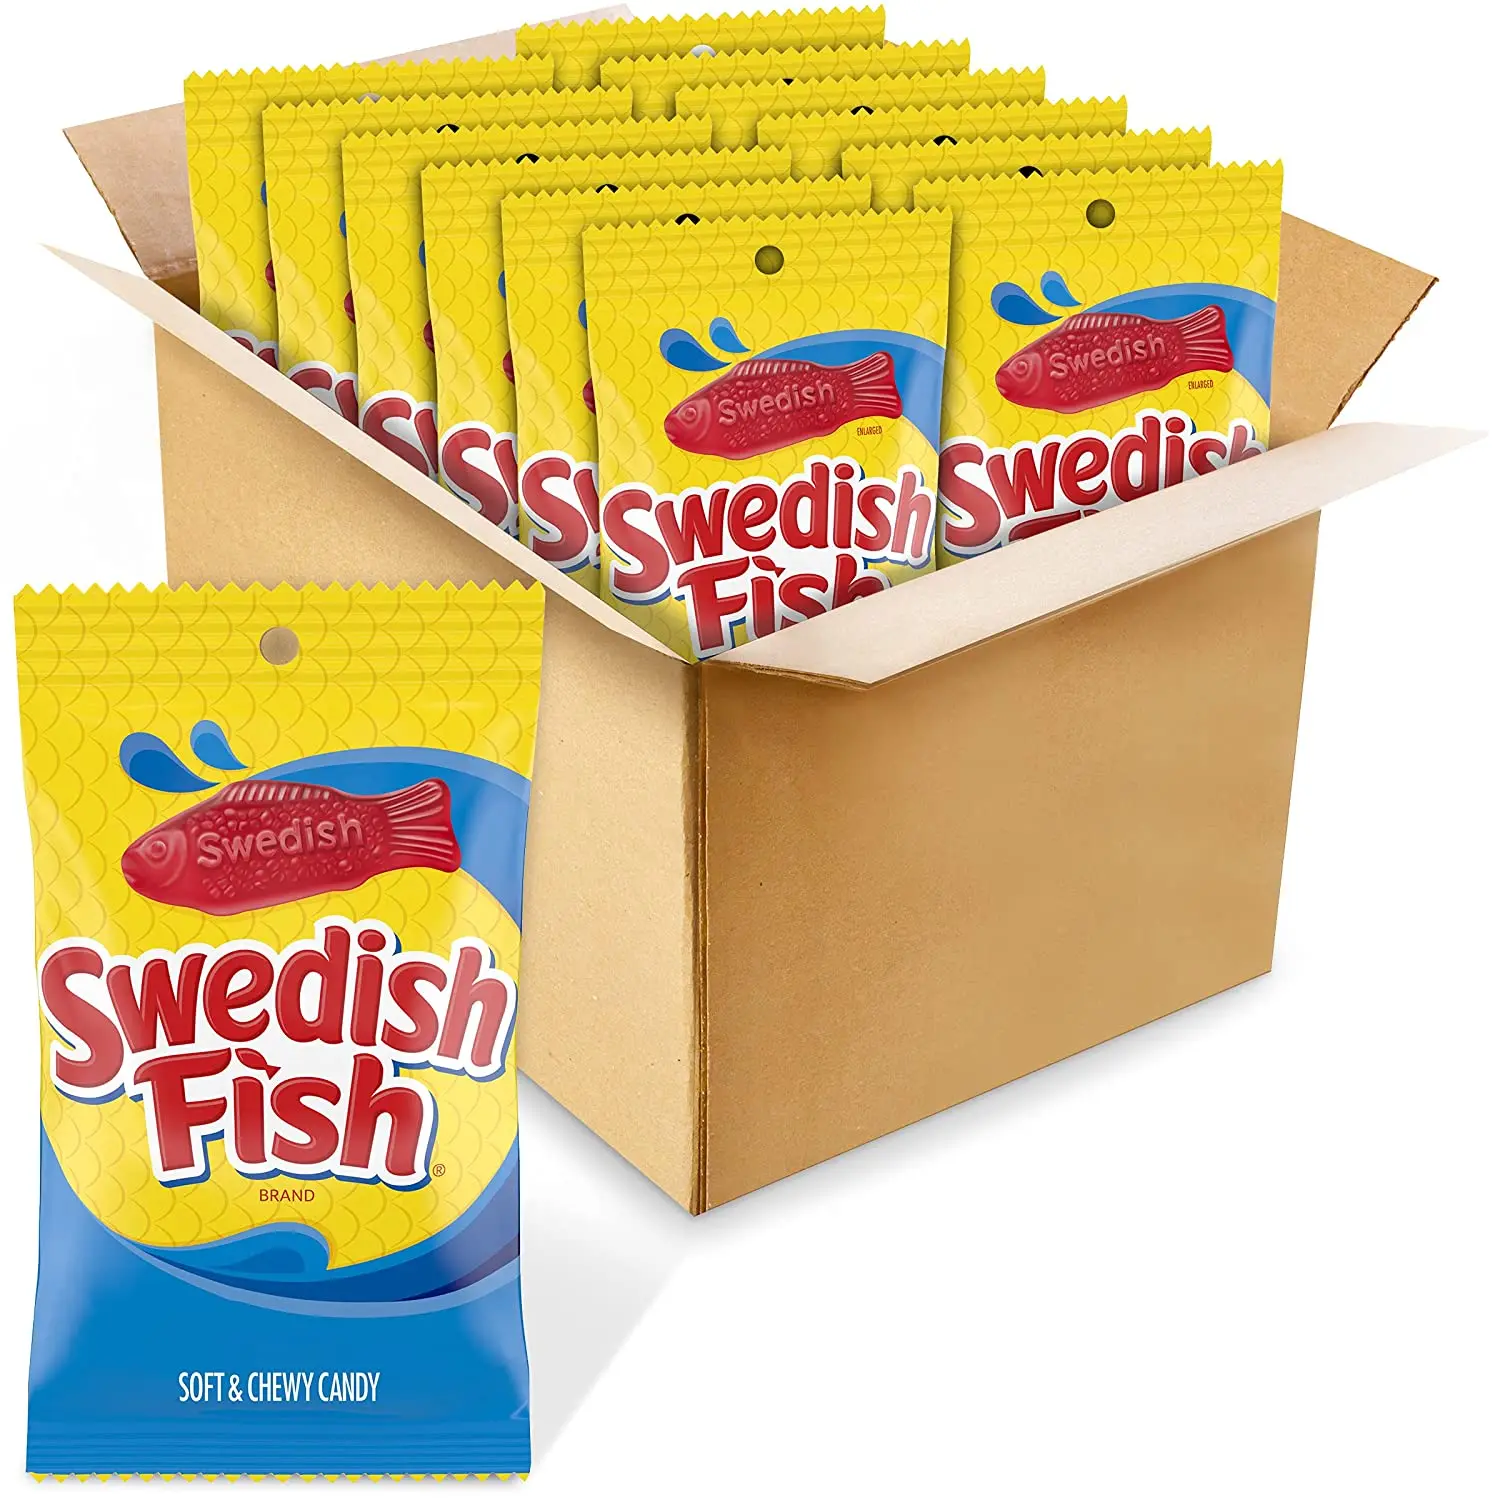 

Swedish Fish Original Soft and Chewy Candy 5oz Bag (Case Pack of 12)